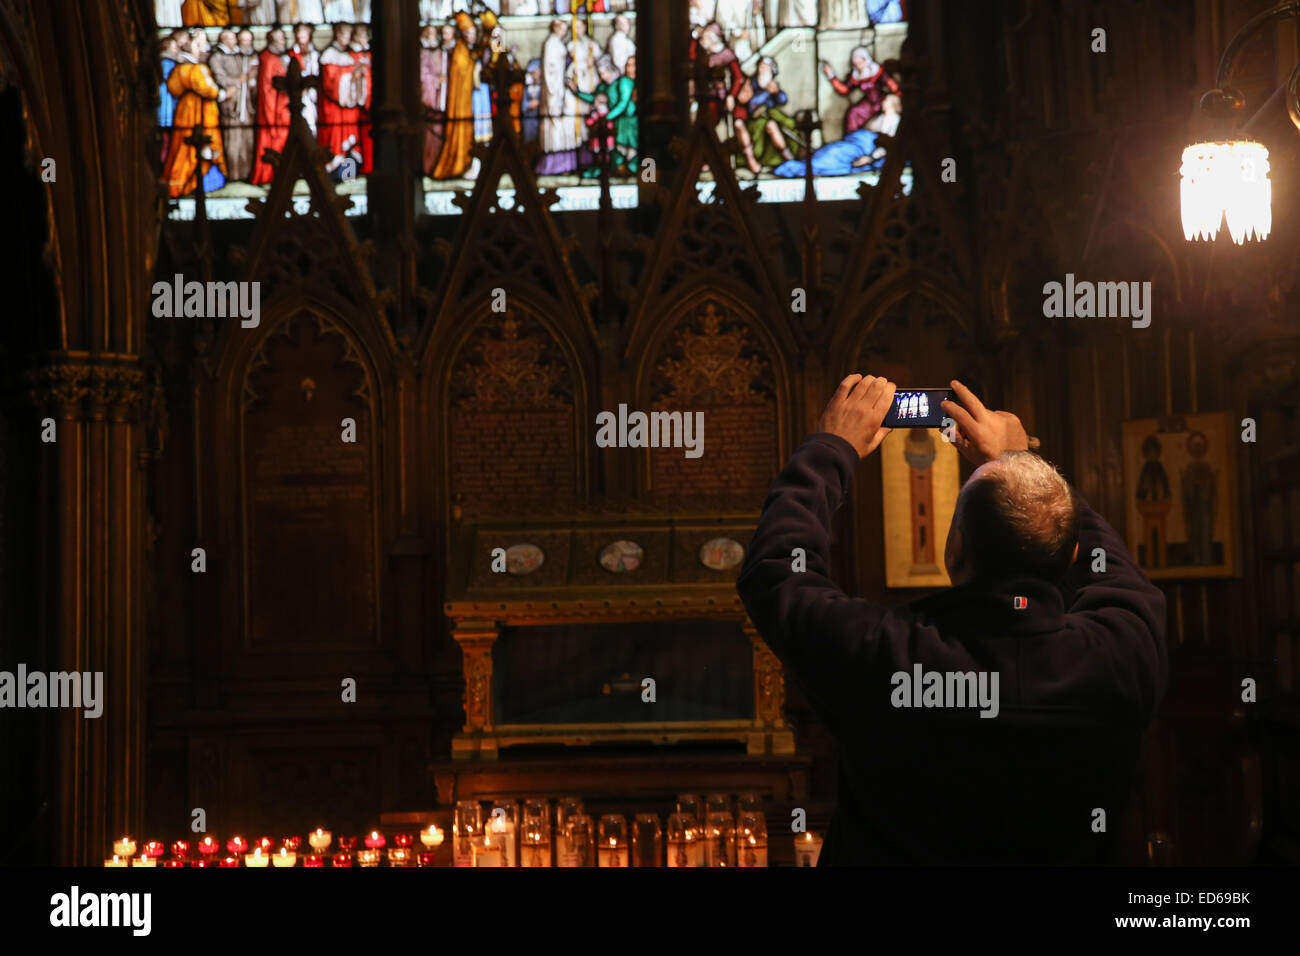 man taking picture iphone cellphone inside church Stock Photo